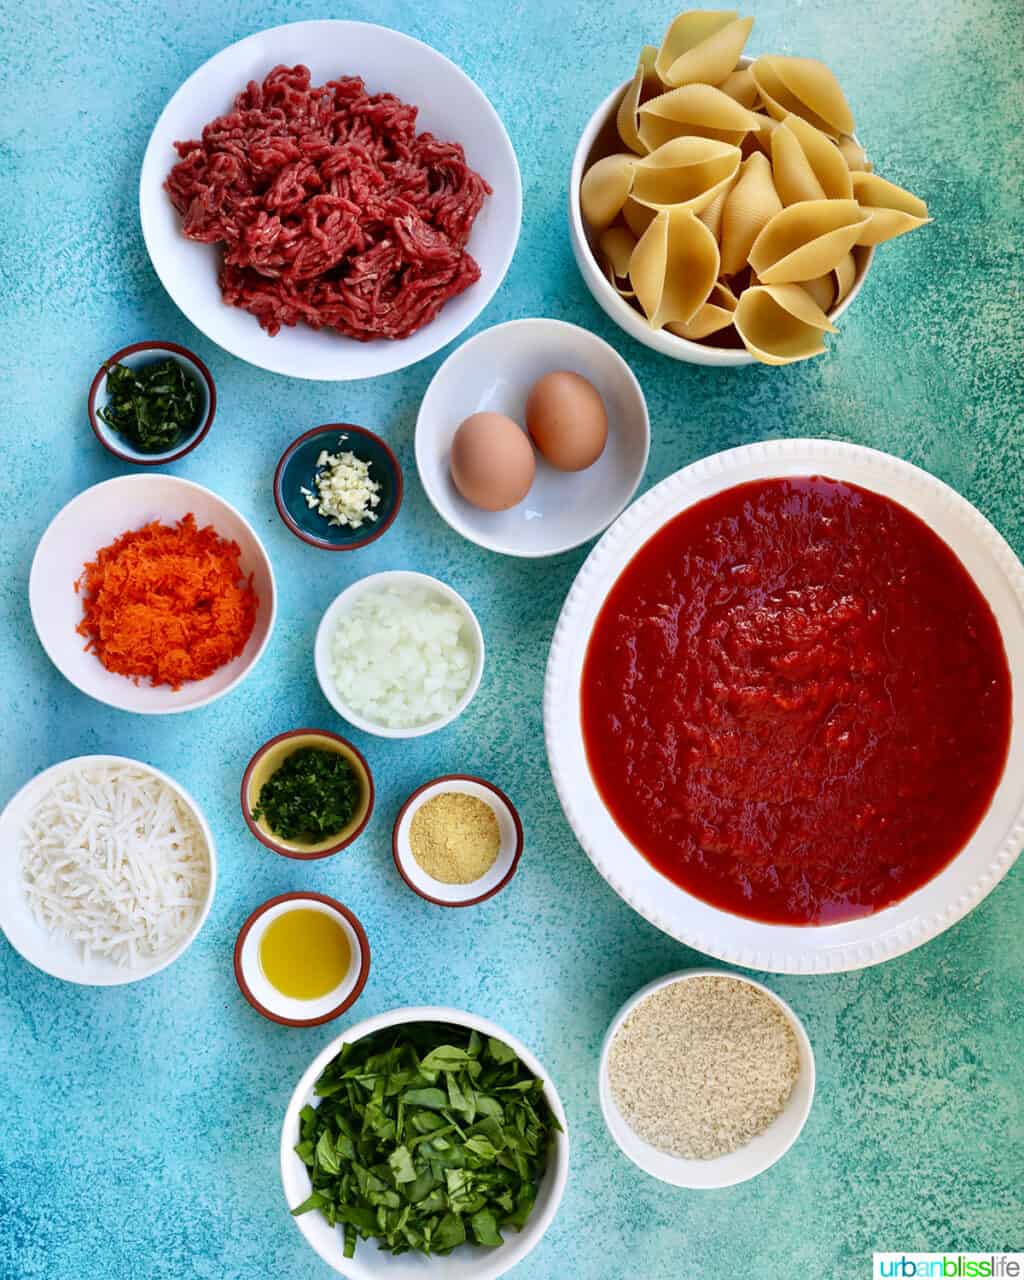 bowls of ingredients to make stuffed shells with ground beef.